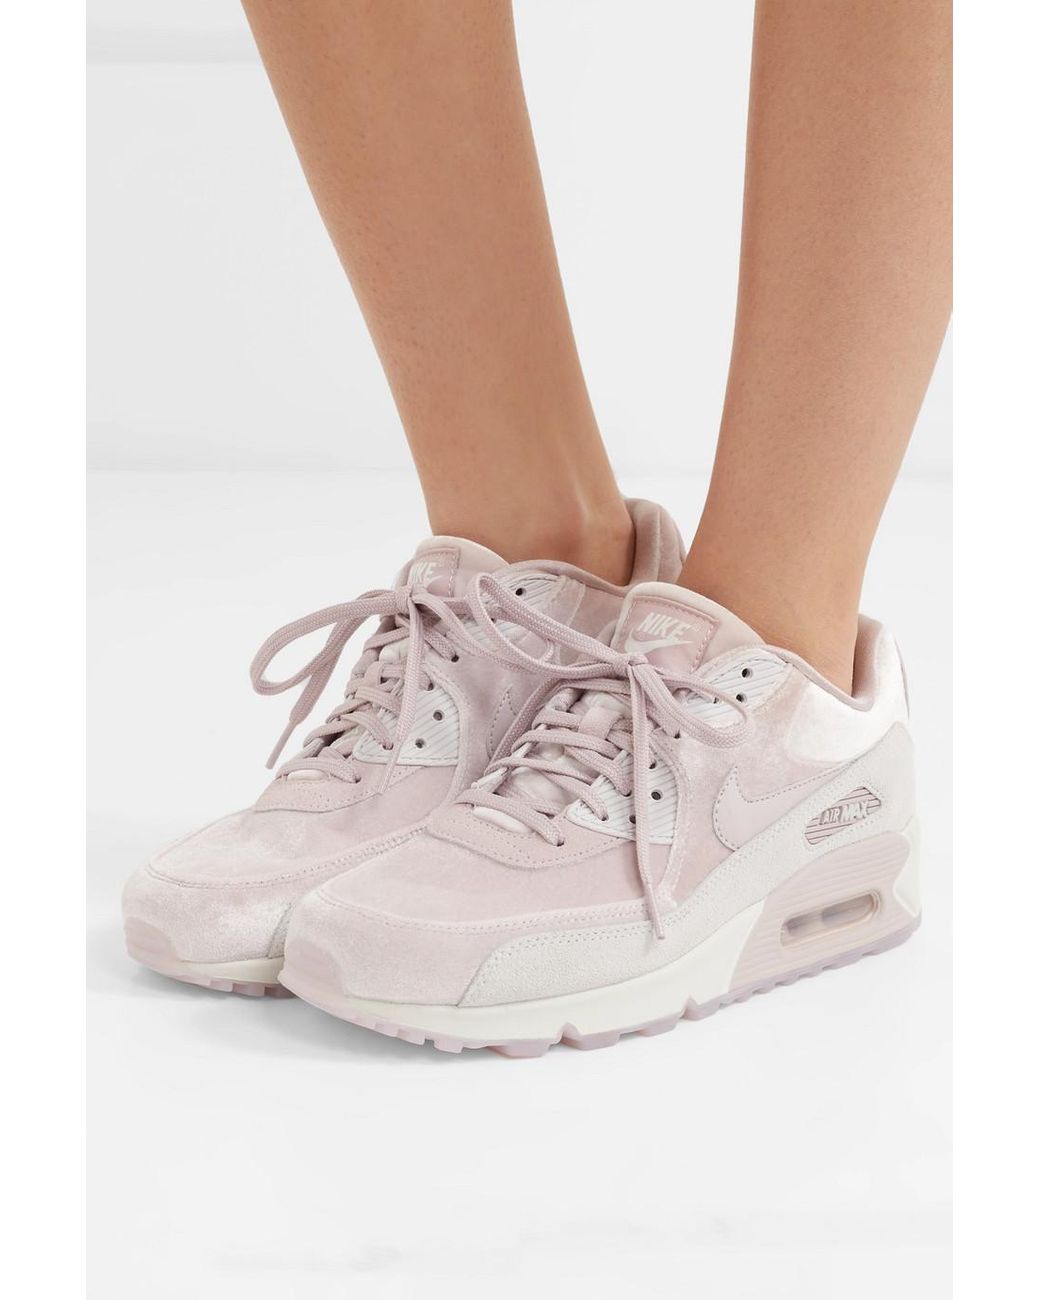 Nike Air Max 90 Lx Velvet And Suede Sneakers in Blush (Pink) | Lyst